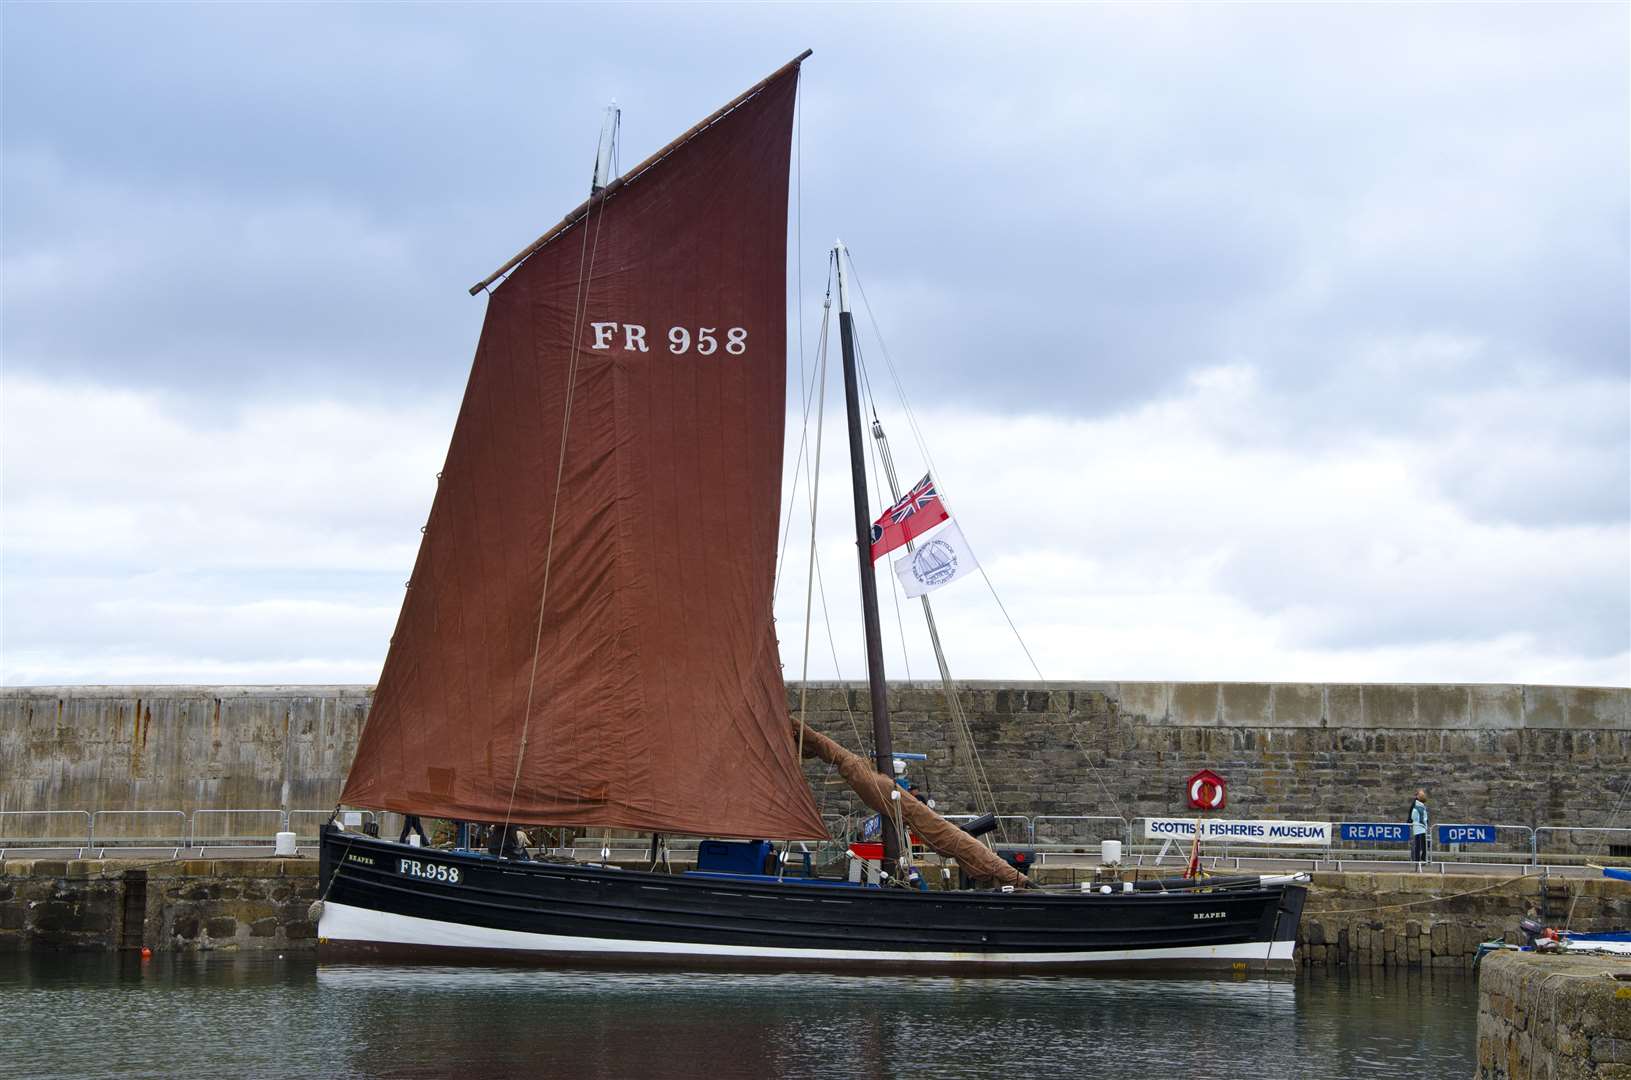 One of the historic herring fishing boats, The Reaper. Picture: Allan Robertson